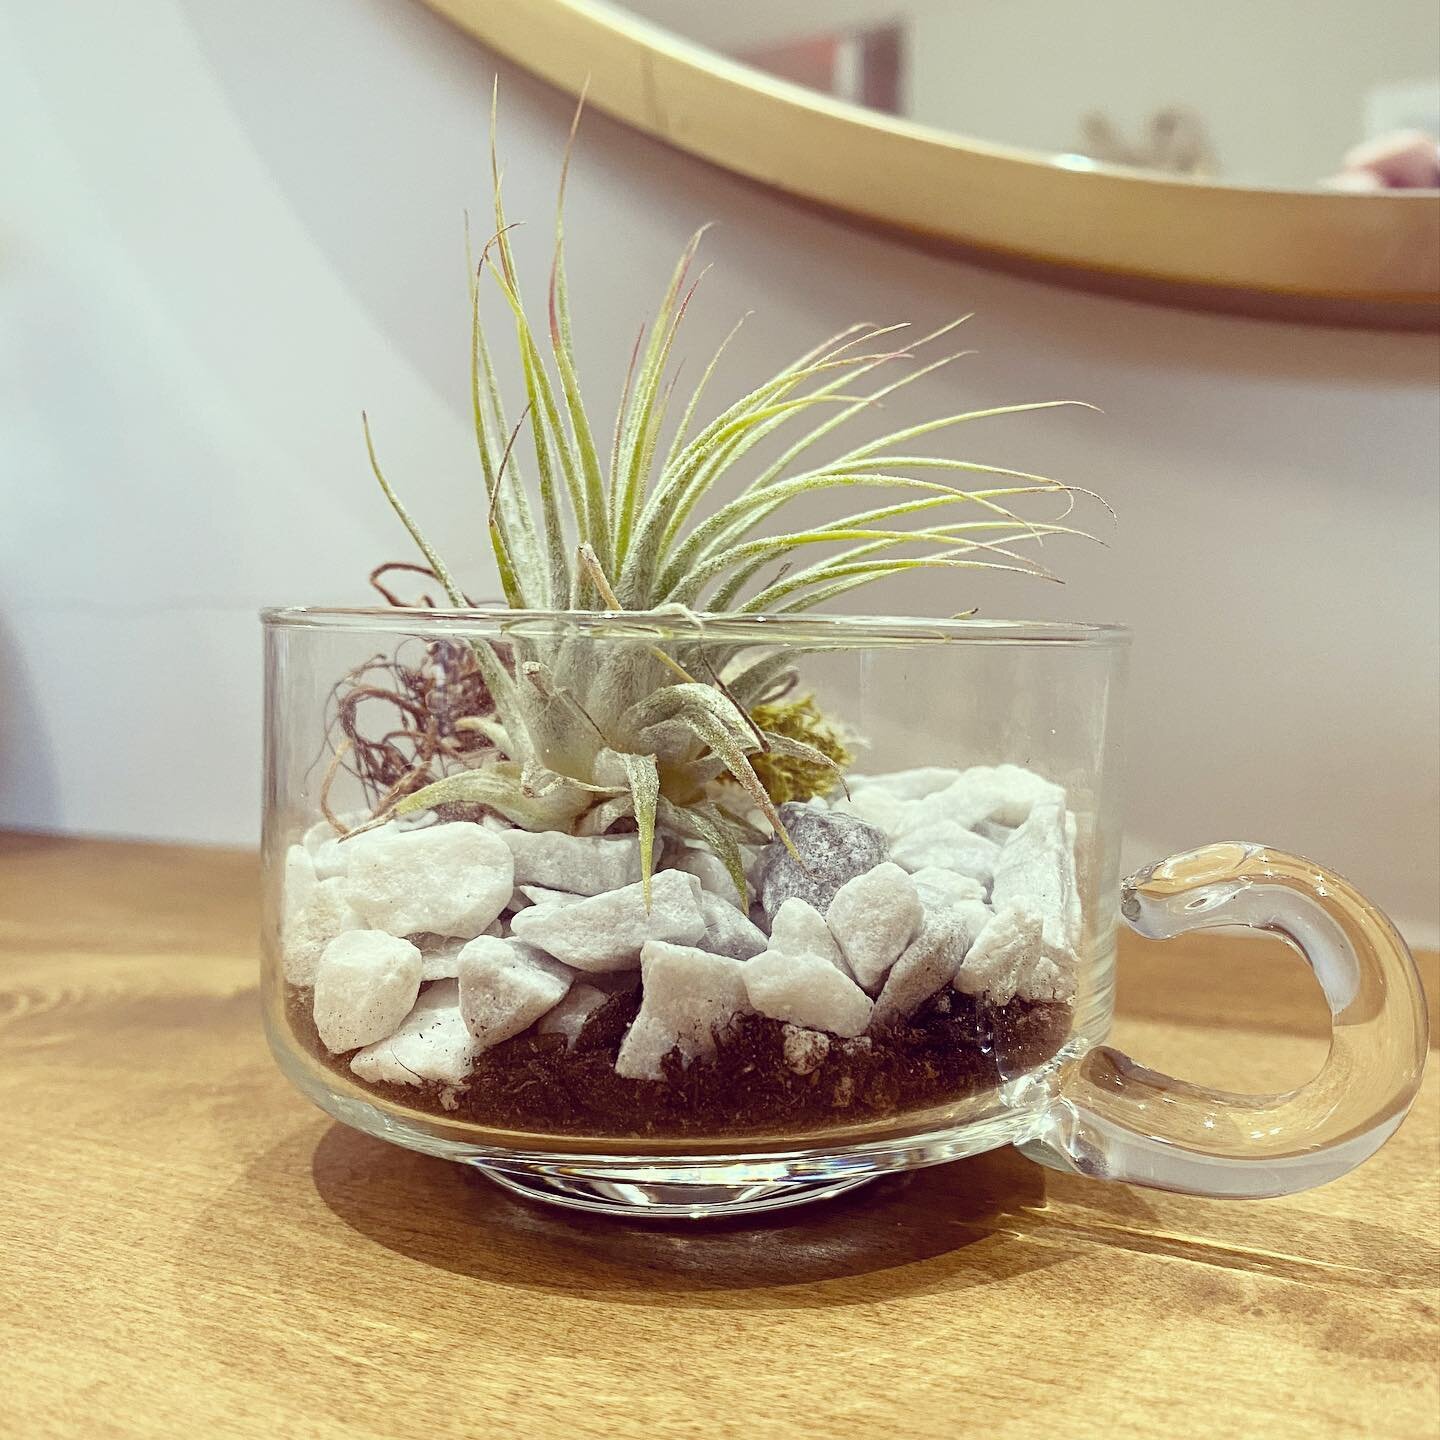 📣 Introducing the first items in our #EverythingsAPlantHolder collection 

 Cappuccino cup terrariums - $20 +tax
🌱 low maintenance 
👉🏻 water once a week
✨4 available 
✨ DM to claim
✨ venmo payment required to hold 
✨ pickup only @theshopon7 

#sh